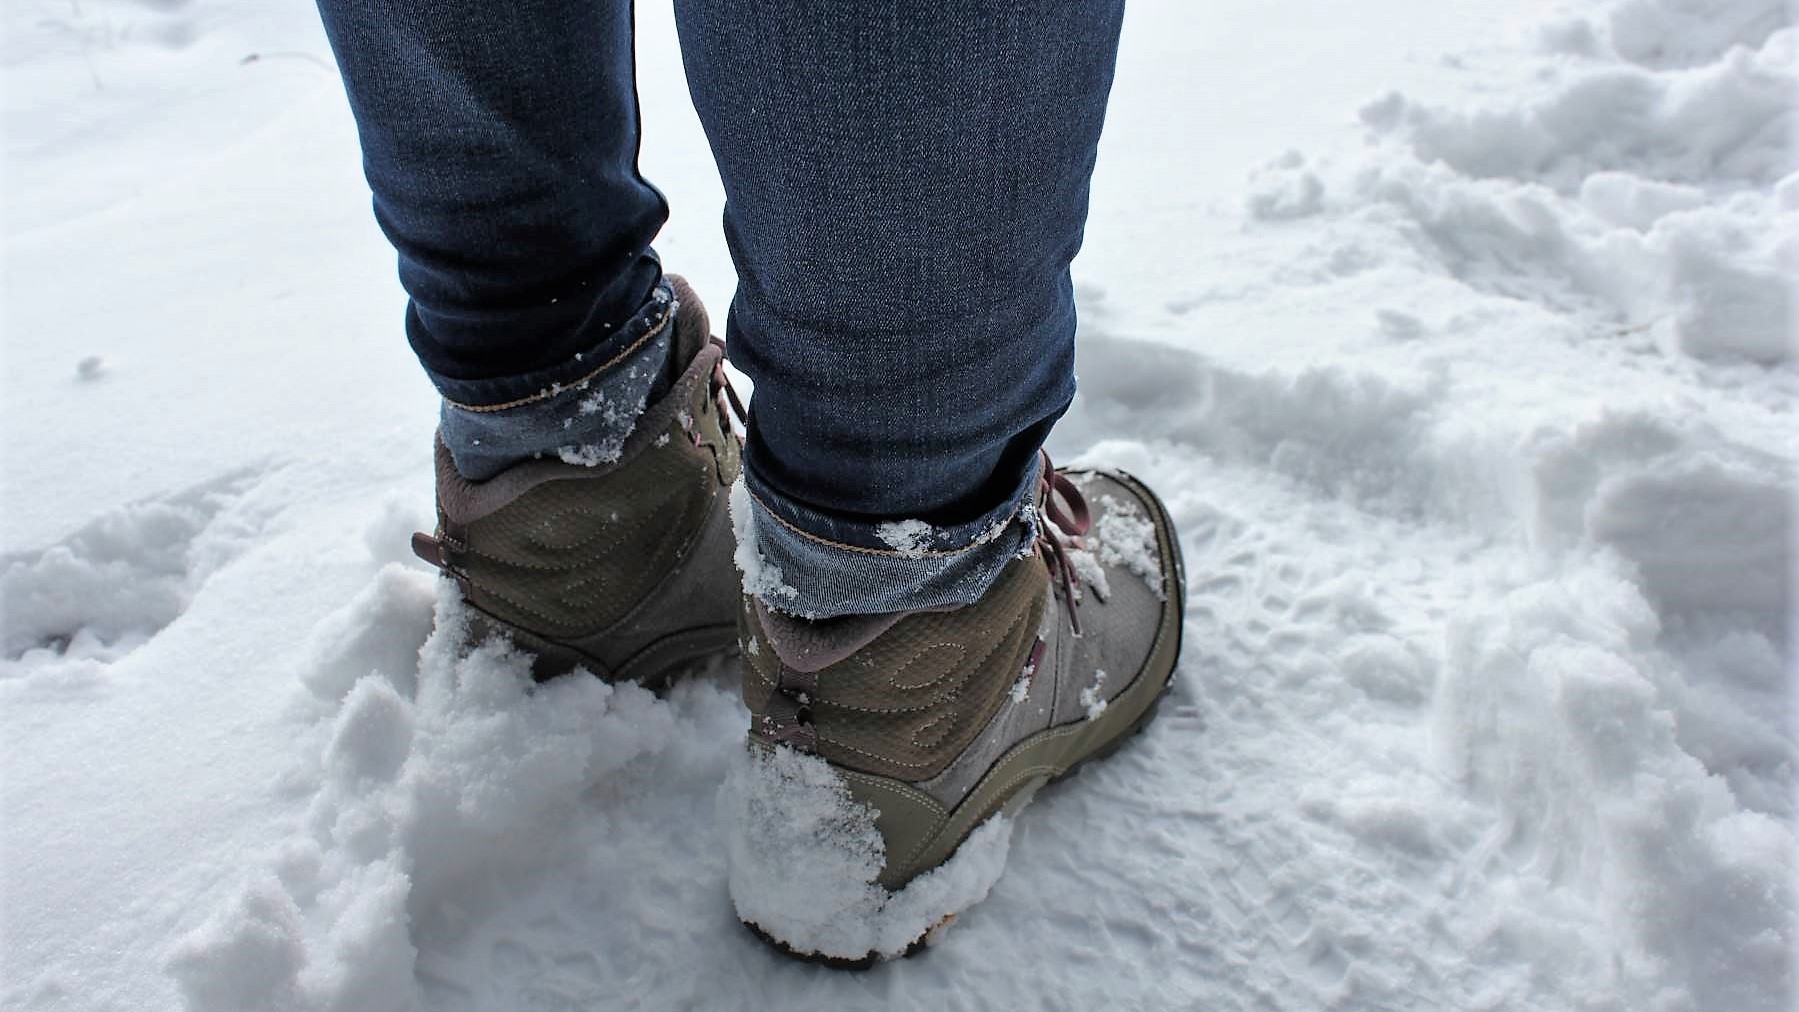 Hiking boots help add traction during snowy days